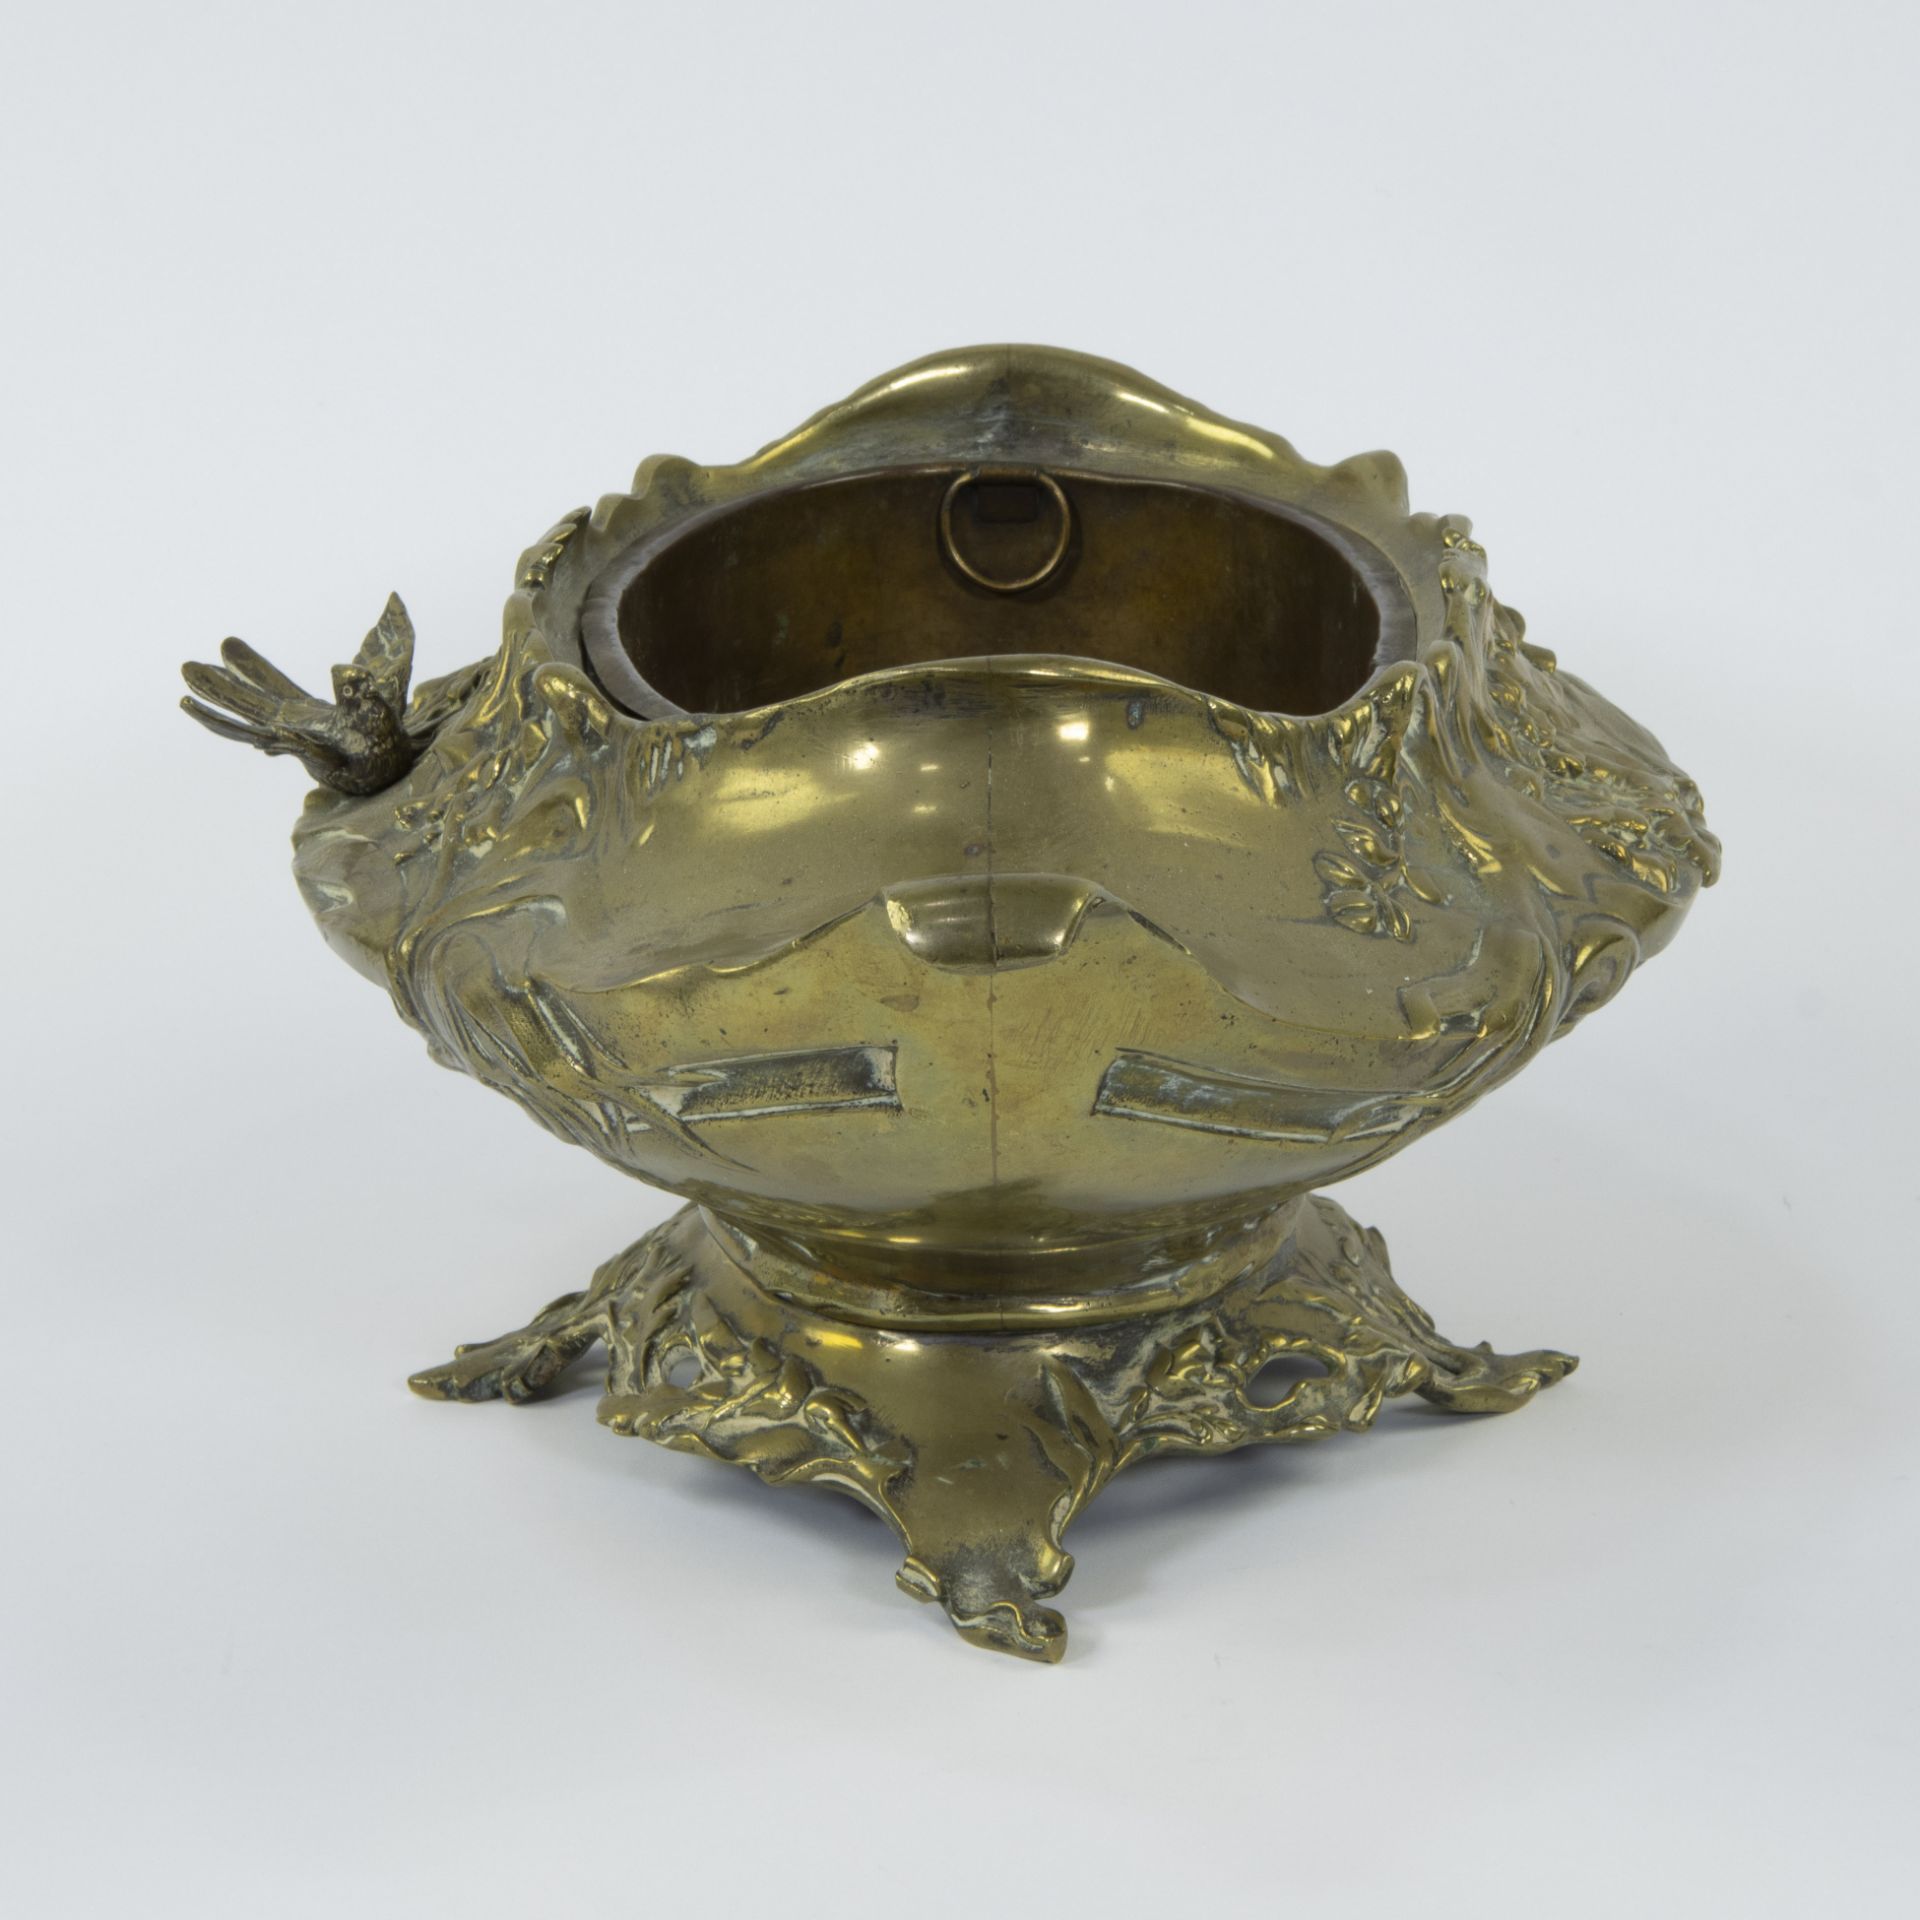 Jardinière in gilt brass decorated with floral motifs and a bird, circa 1920 - Image 4 of 4